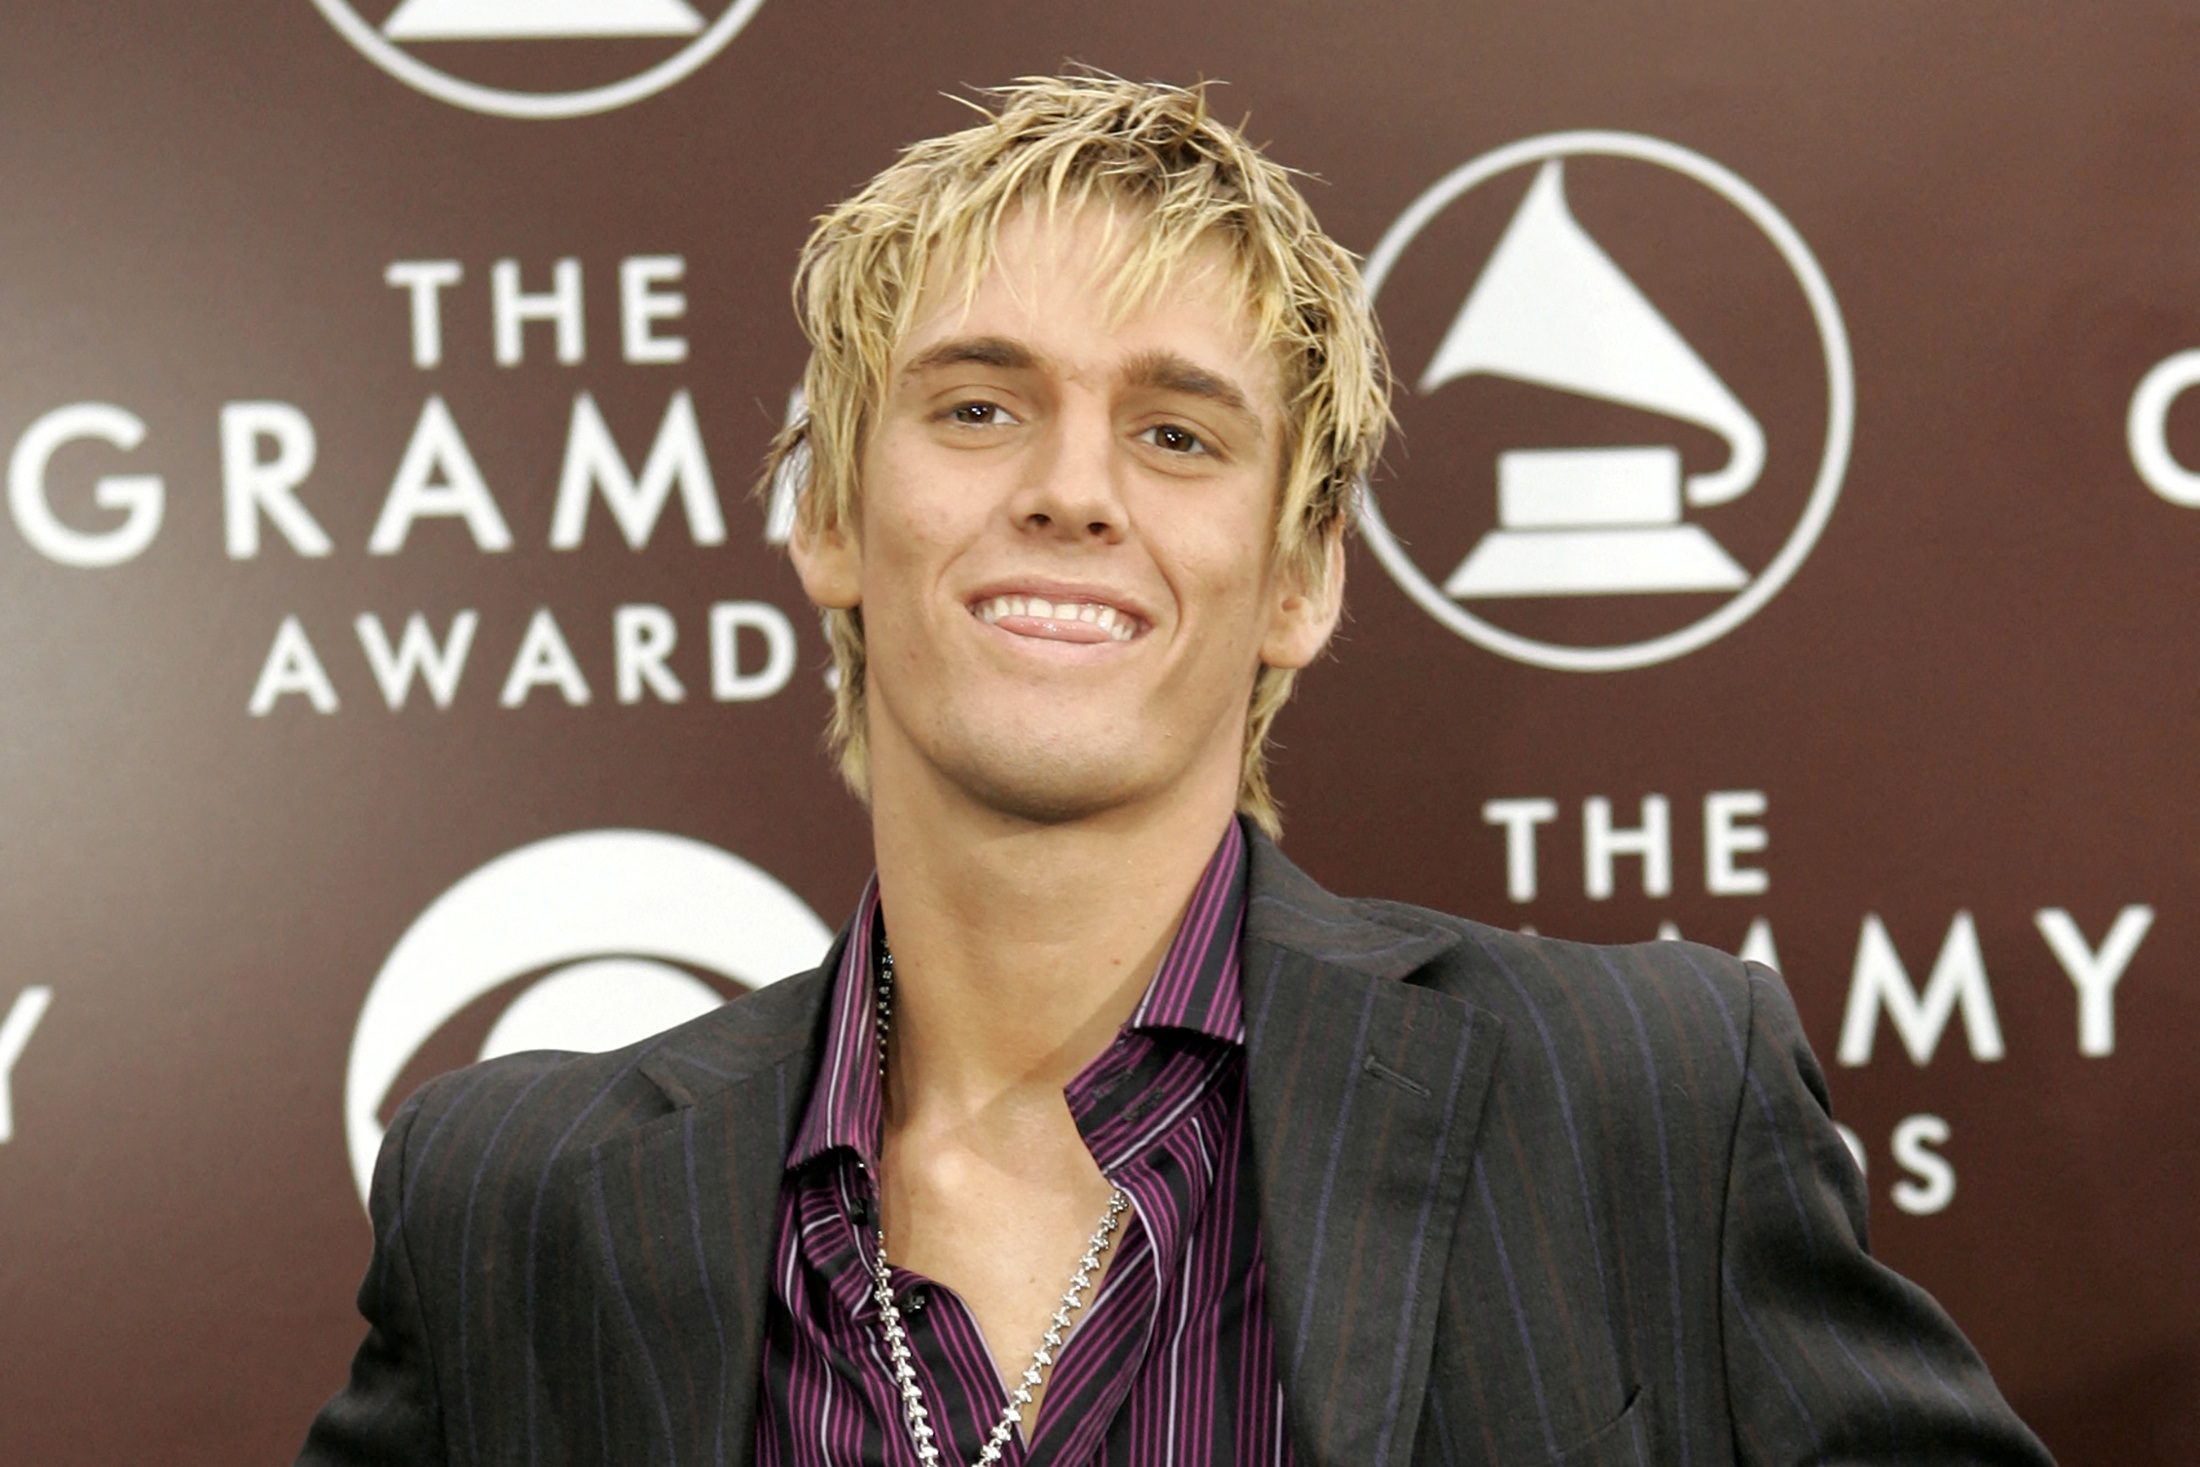 Singer Aaron Carter, 34, found dead in his home – reports